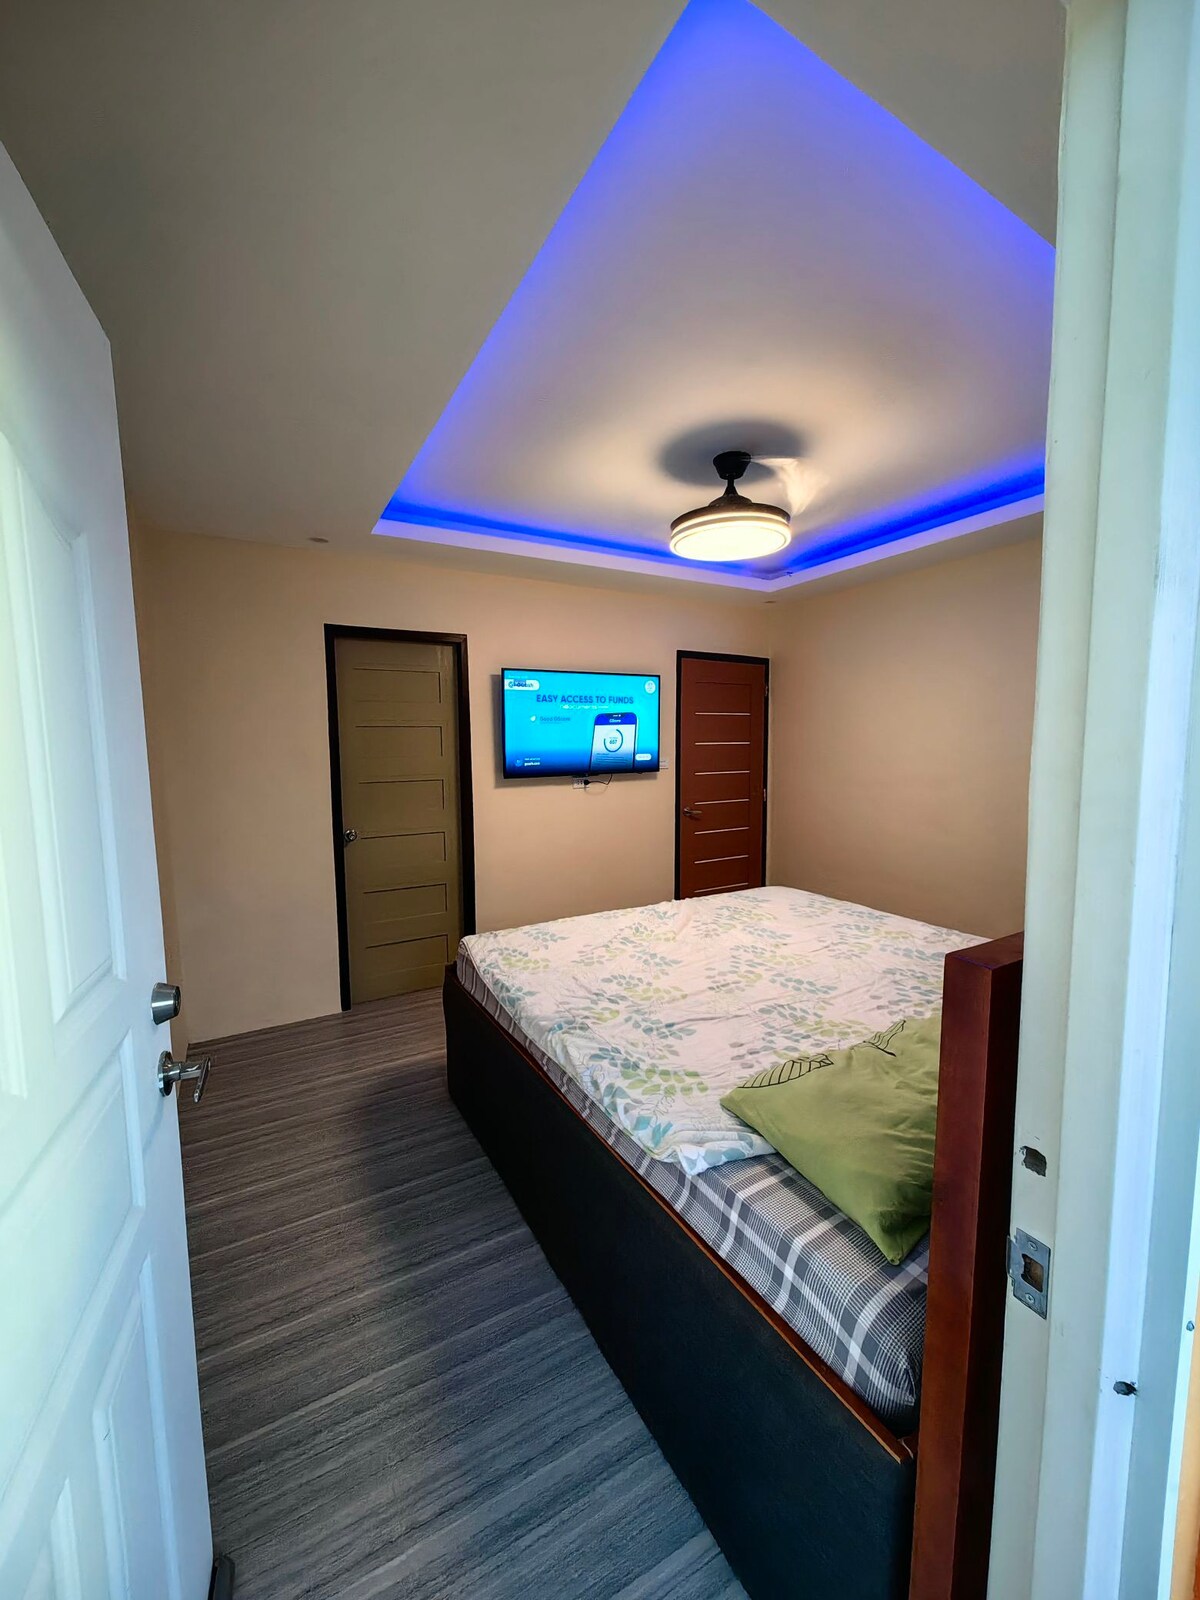 Graydon's Pad
Ensuite Room stay in Cauayan City.